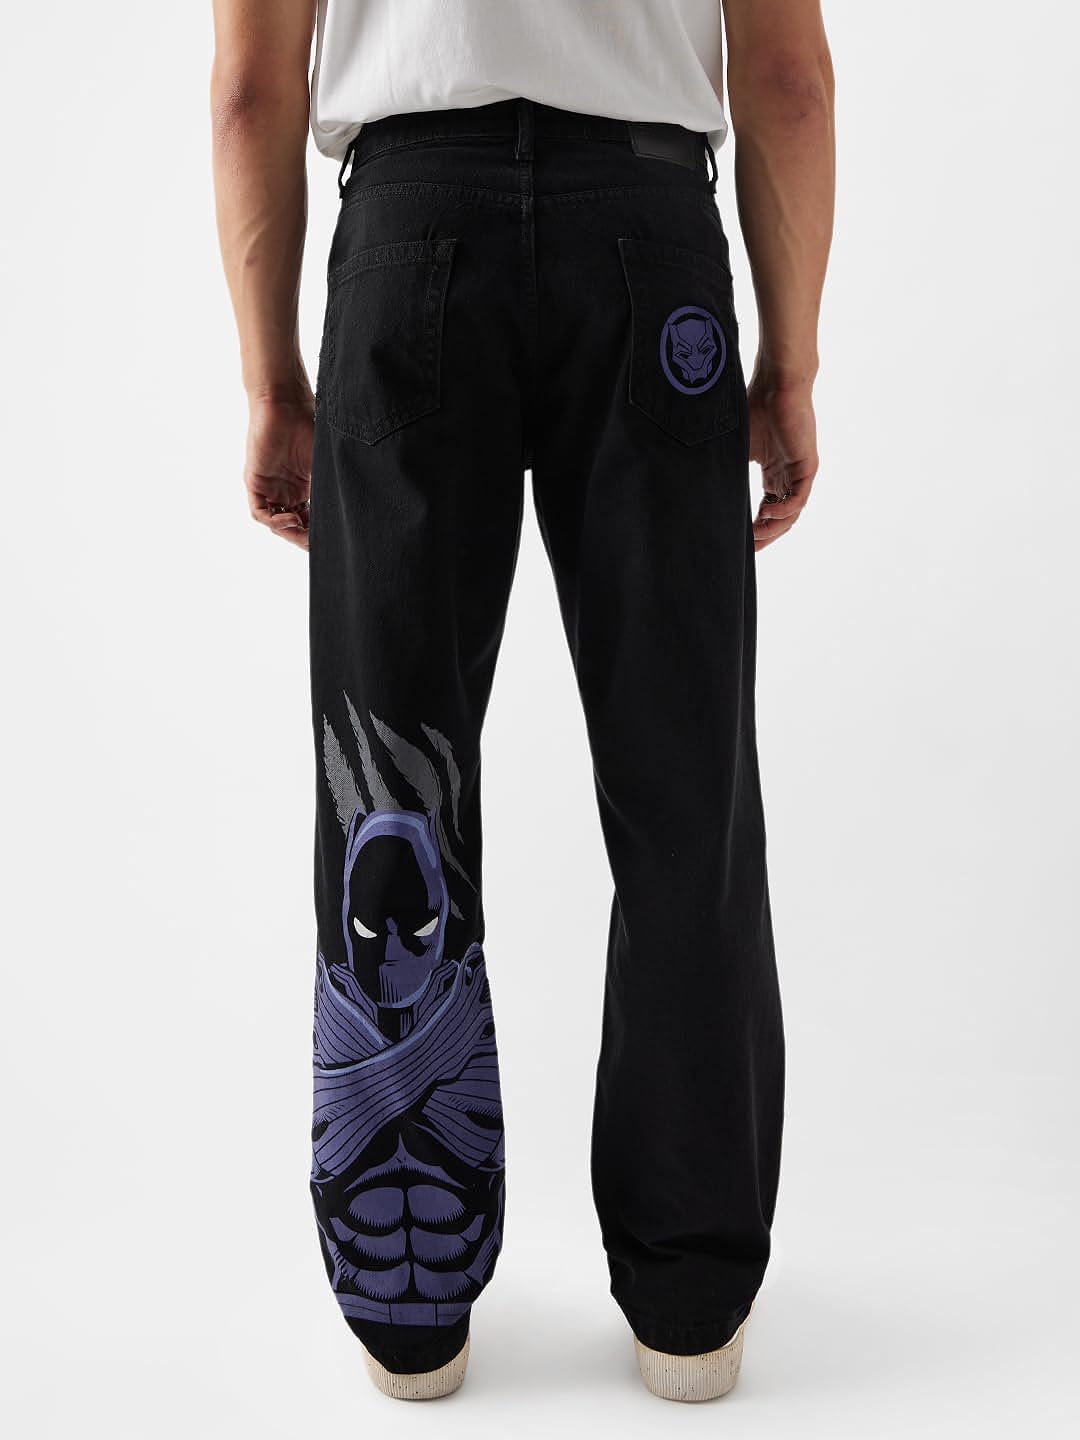 The Souled Store Official Black Panther: Claws (Straight Fit) Mens Cotton and Spandex Black Color Jeans